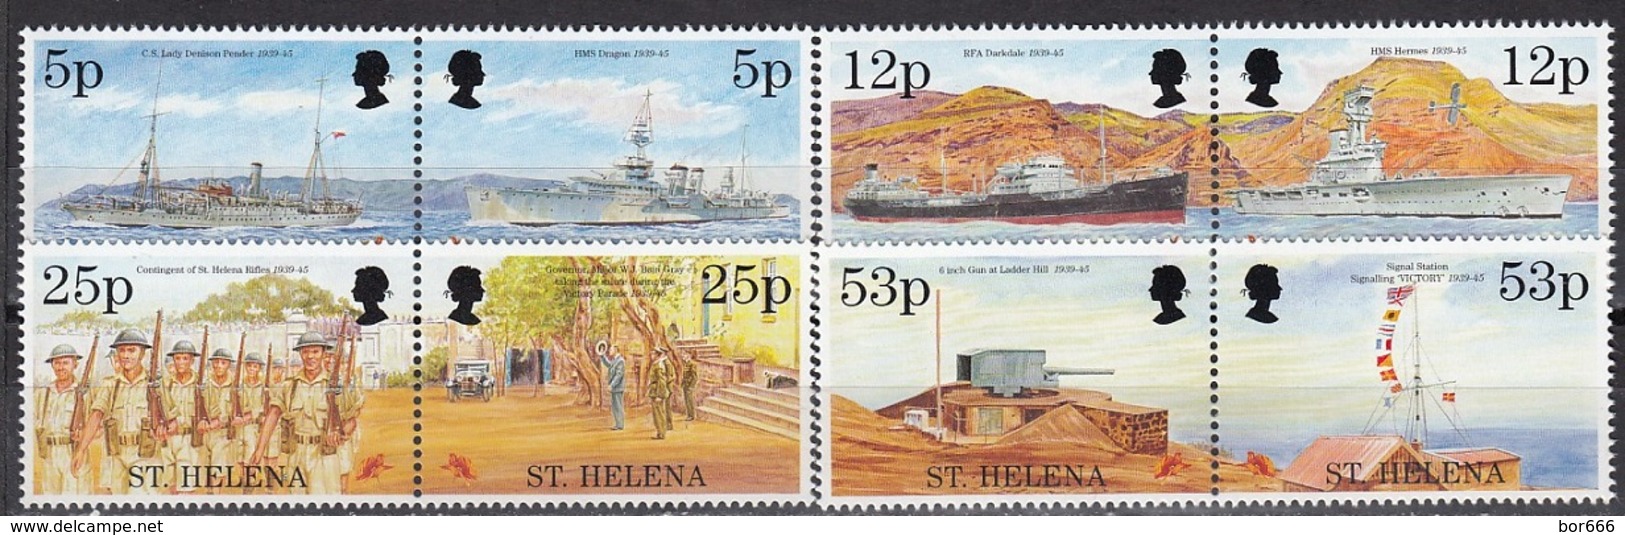 St Helena - END OF WWII / SHIPS / CAR / ARMY 1995 MNH - Isola Di Sant'Elena